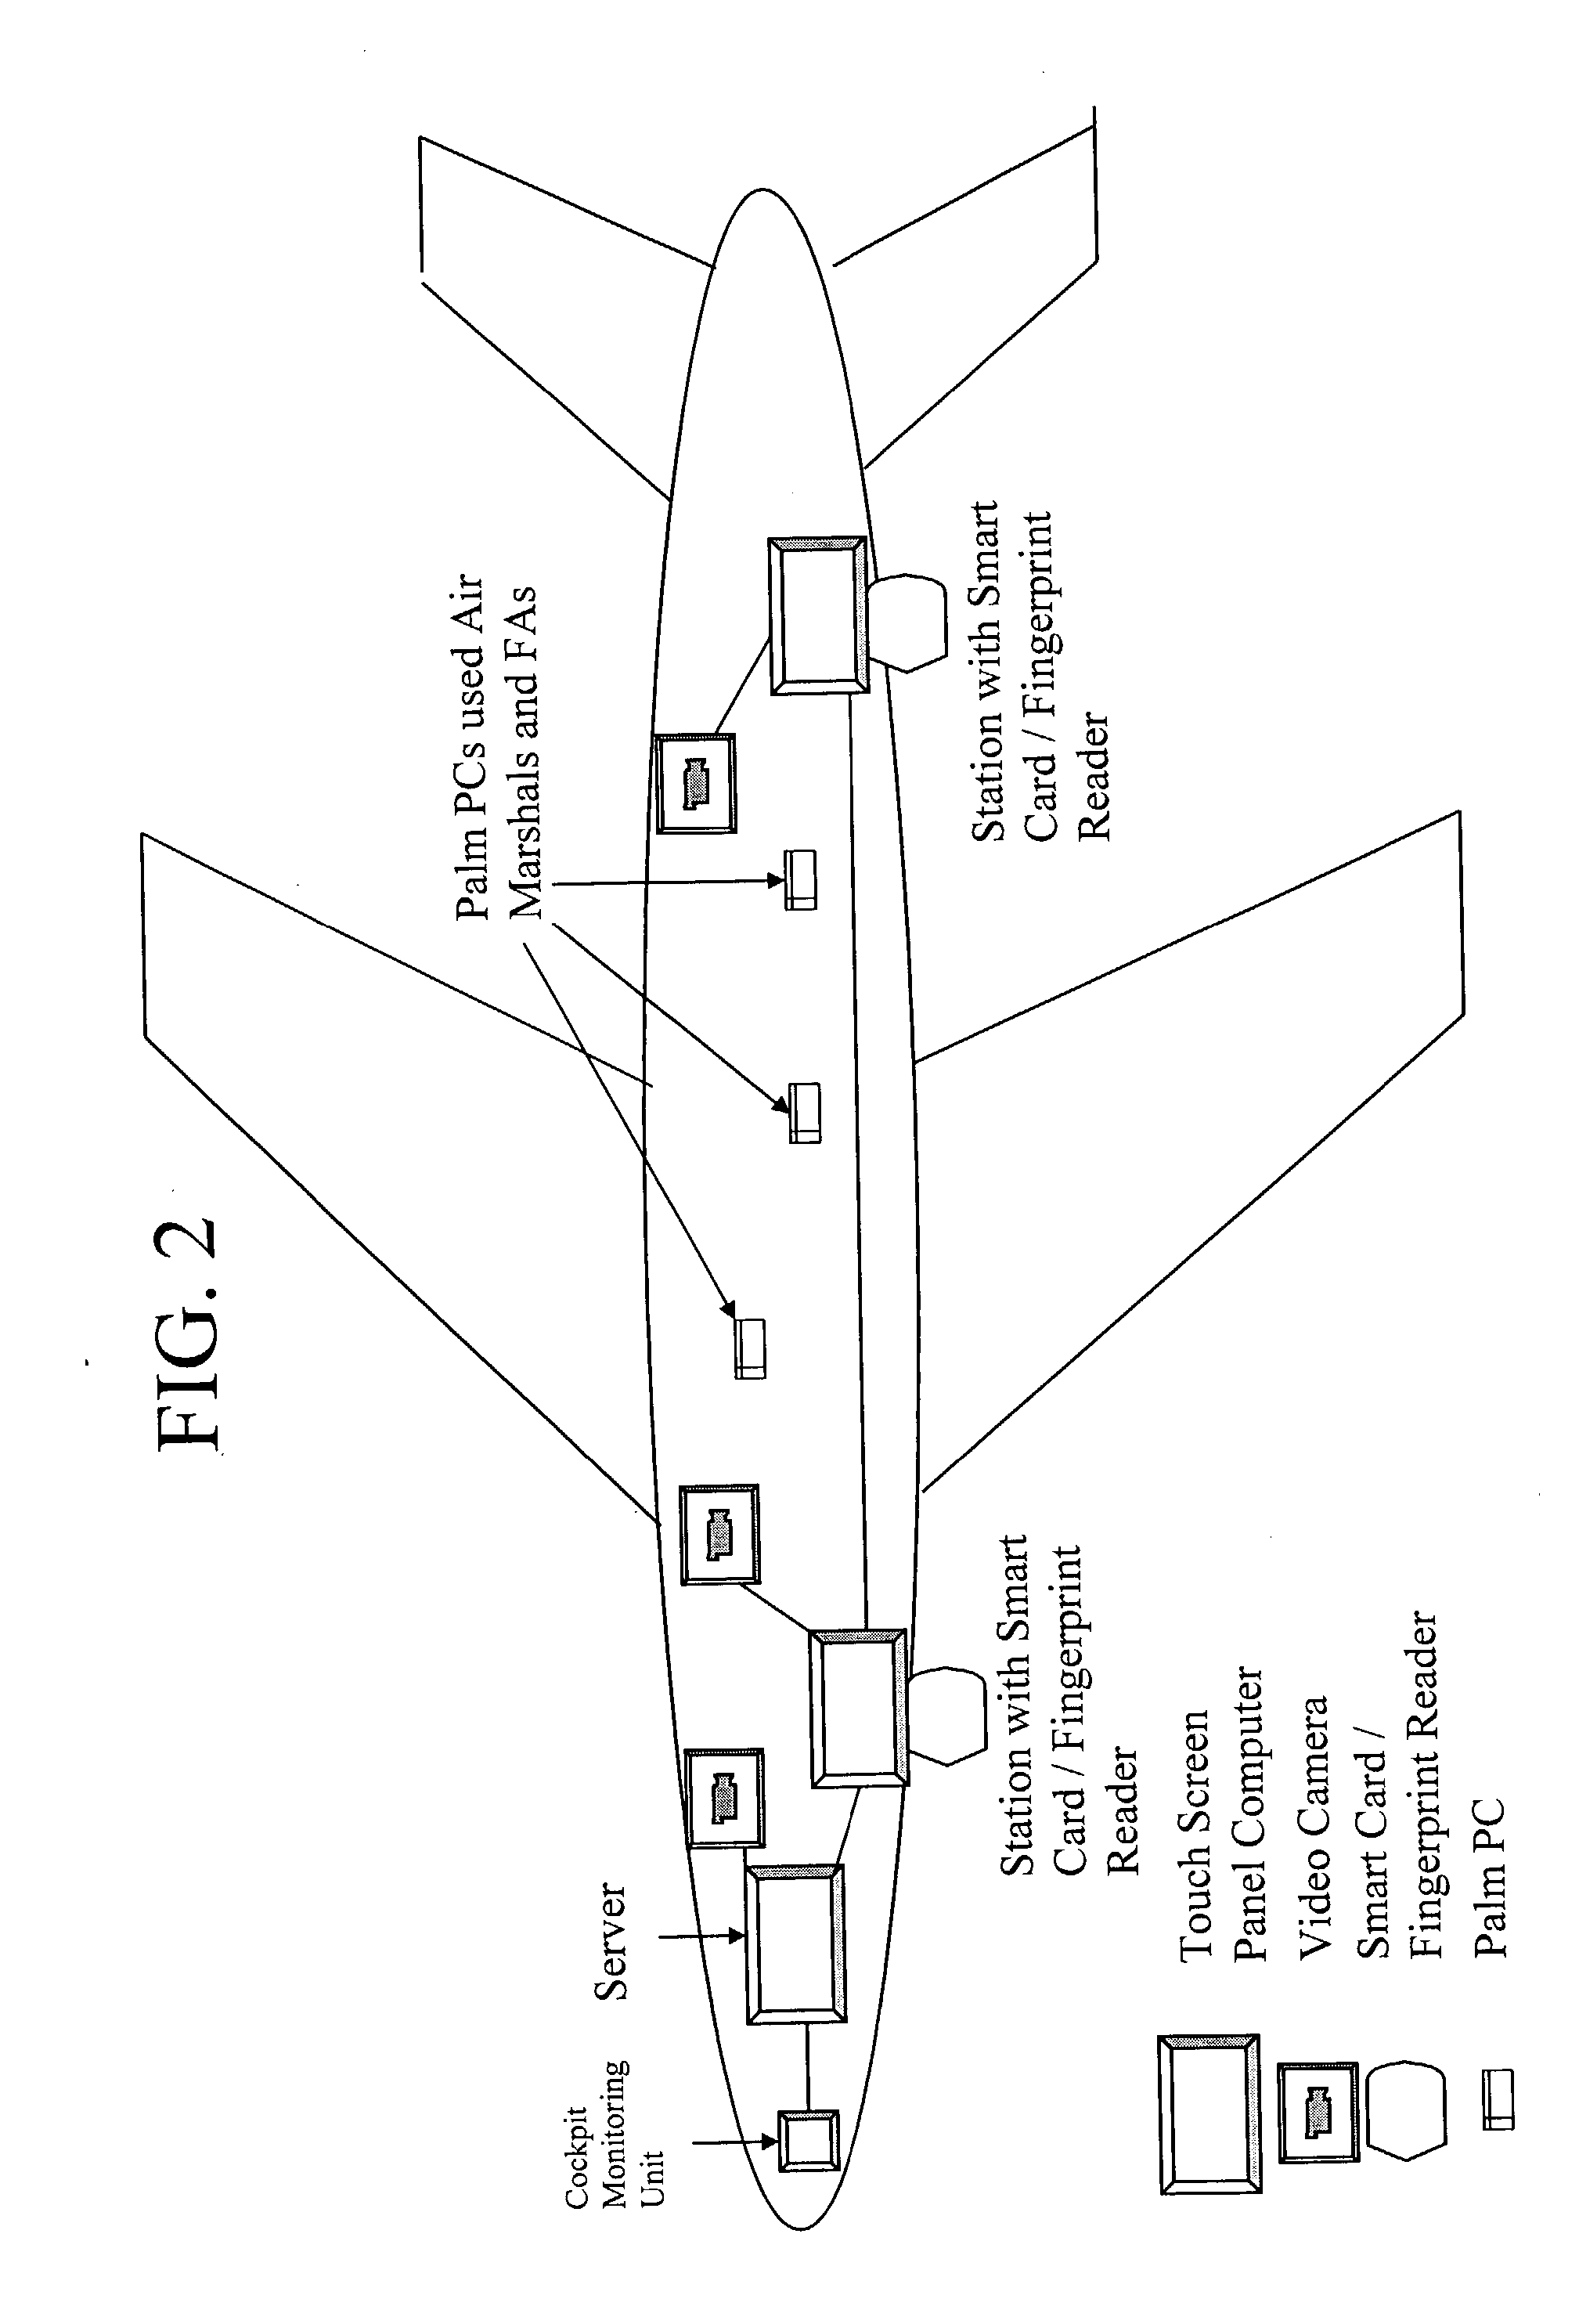 System and method for airplane security / service / maintenance management